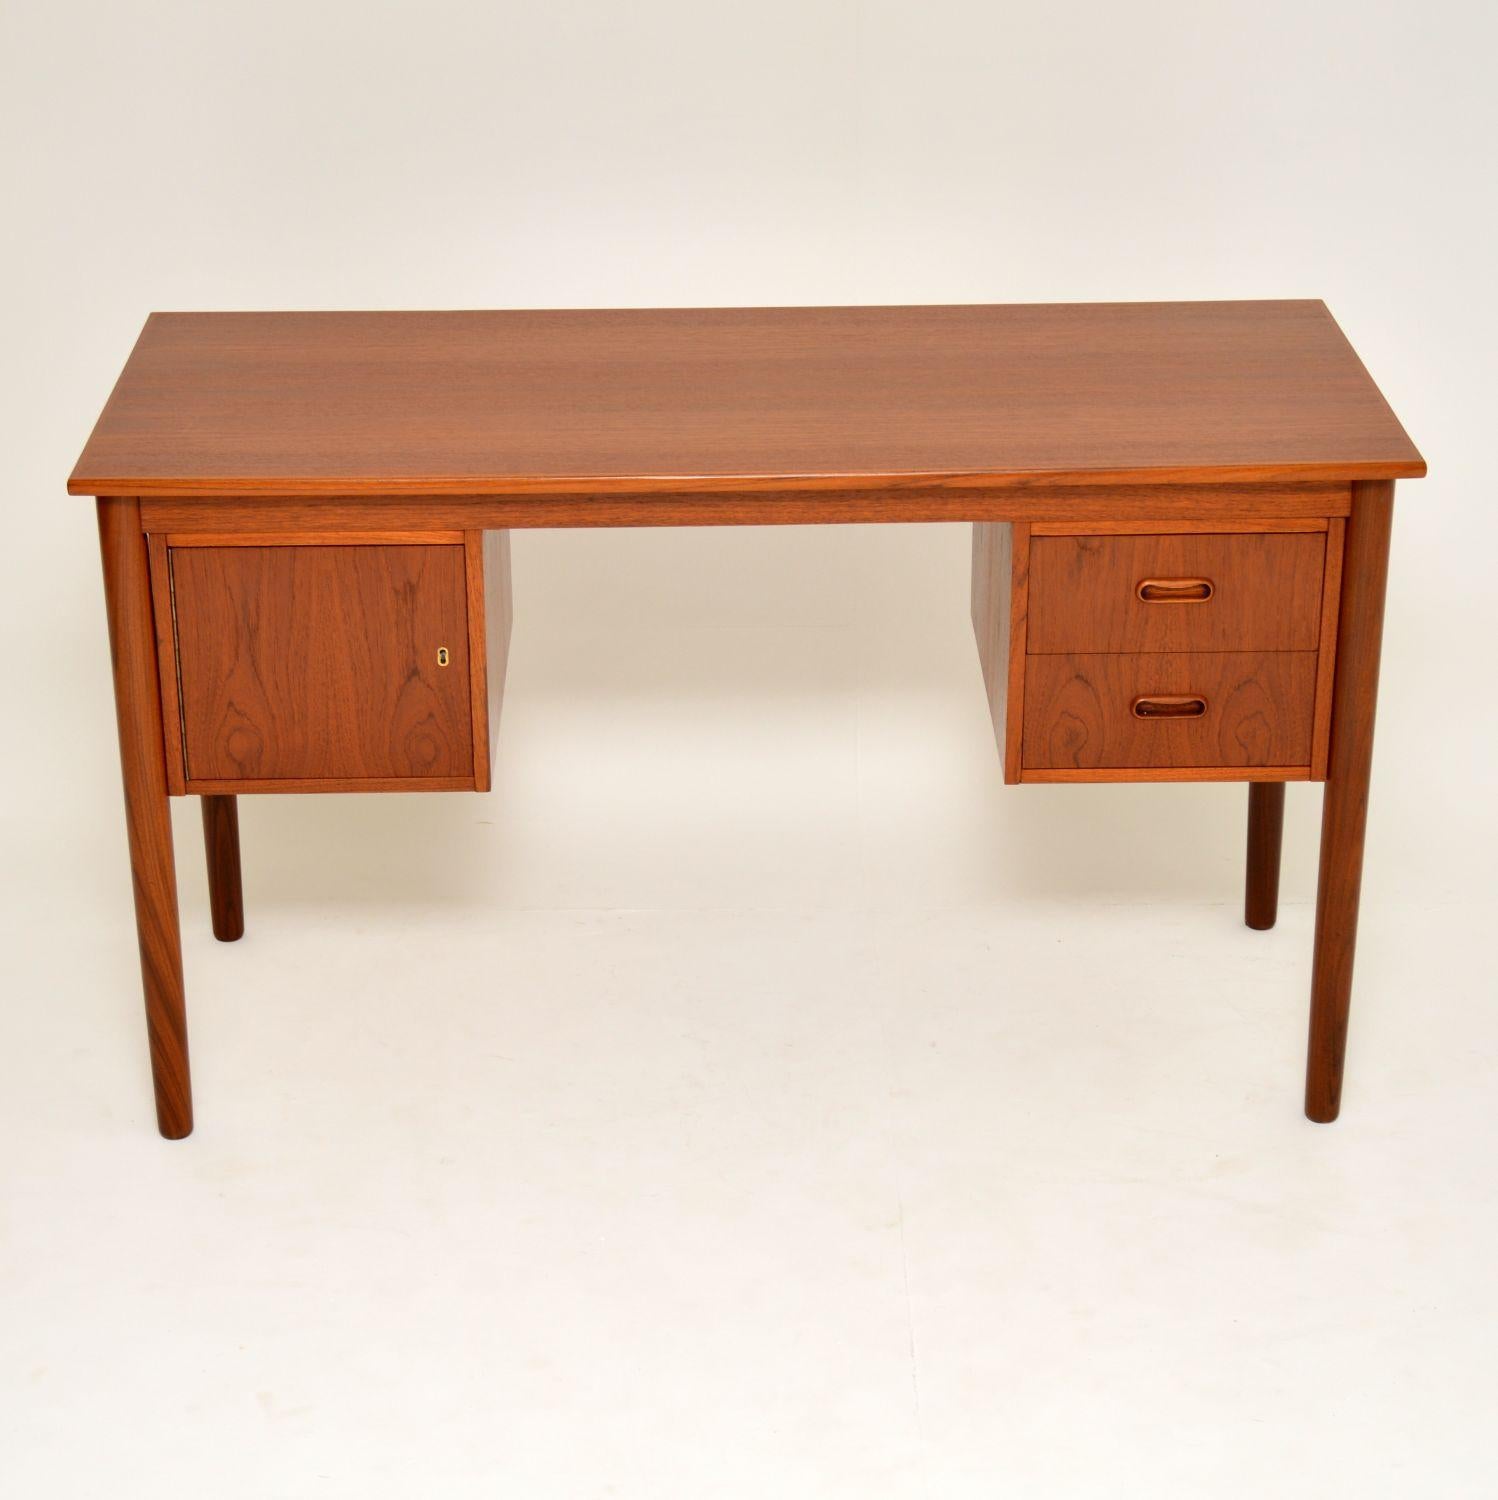 A beautifully made and very stylish vintage desk in Teak, this was made in Denmark and it dates from the 1960s. The proportions on this are lovely, it is also nicely finished on the back if you wanted to use it as a free standing piece. This comes